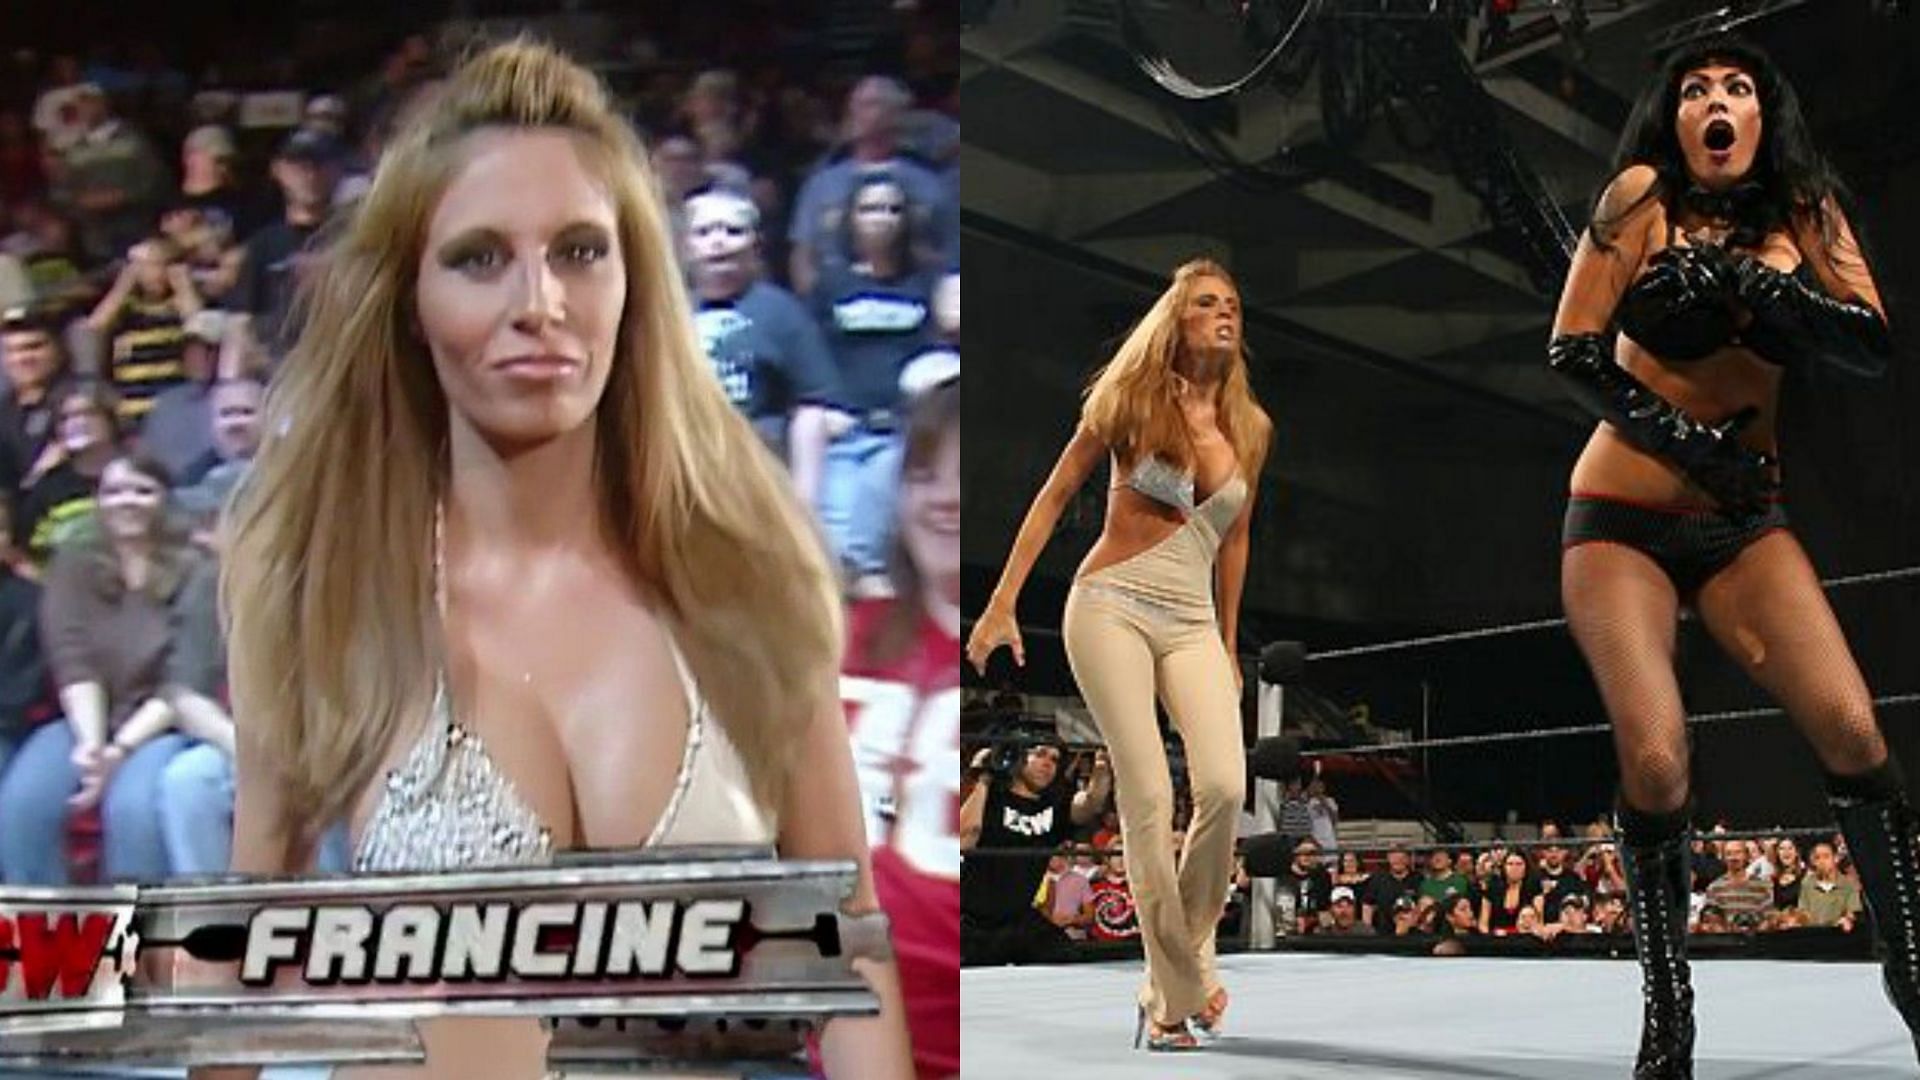 Francine was released from her WWE contract in 2006